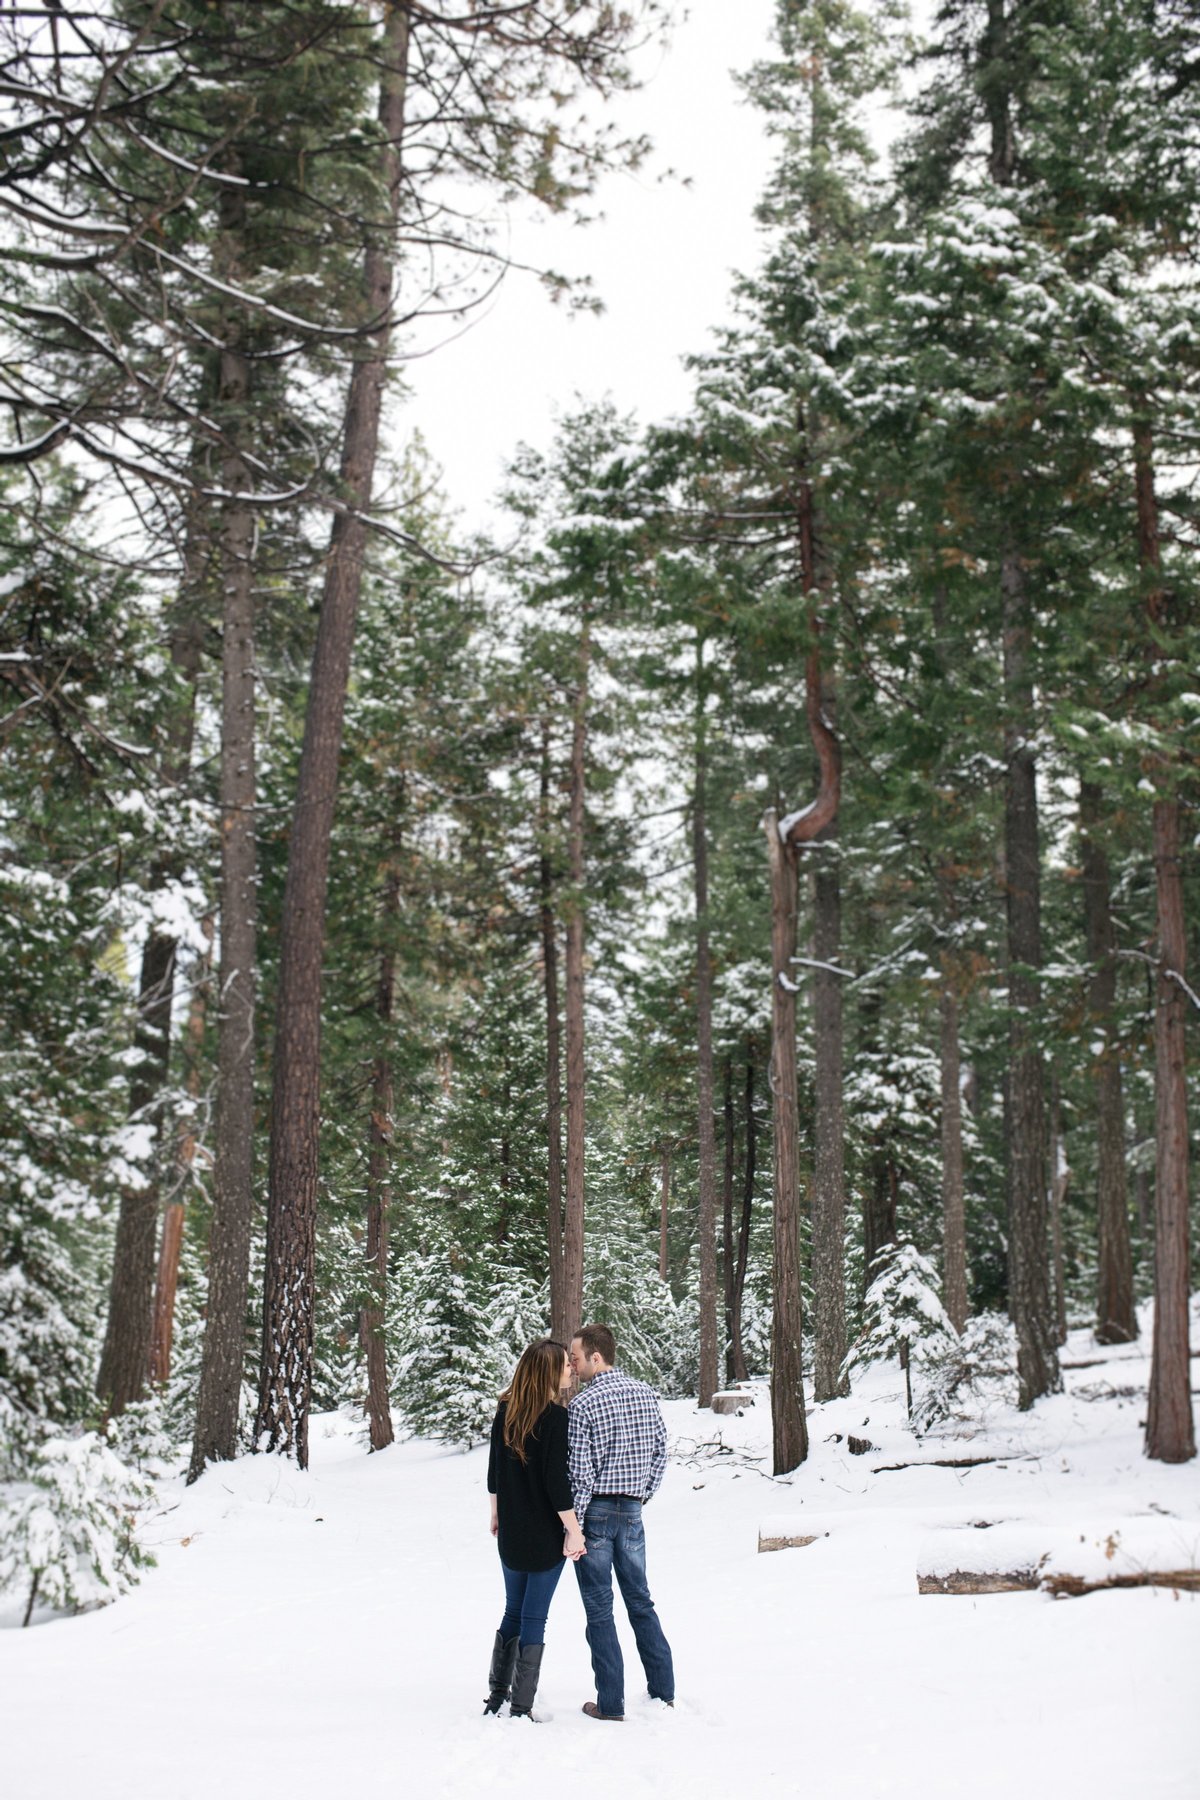 Engagement session in snow Lake Tahoe, Ca